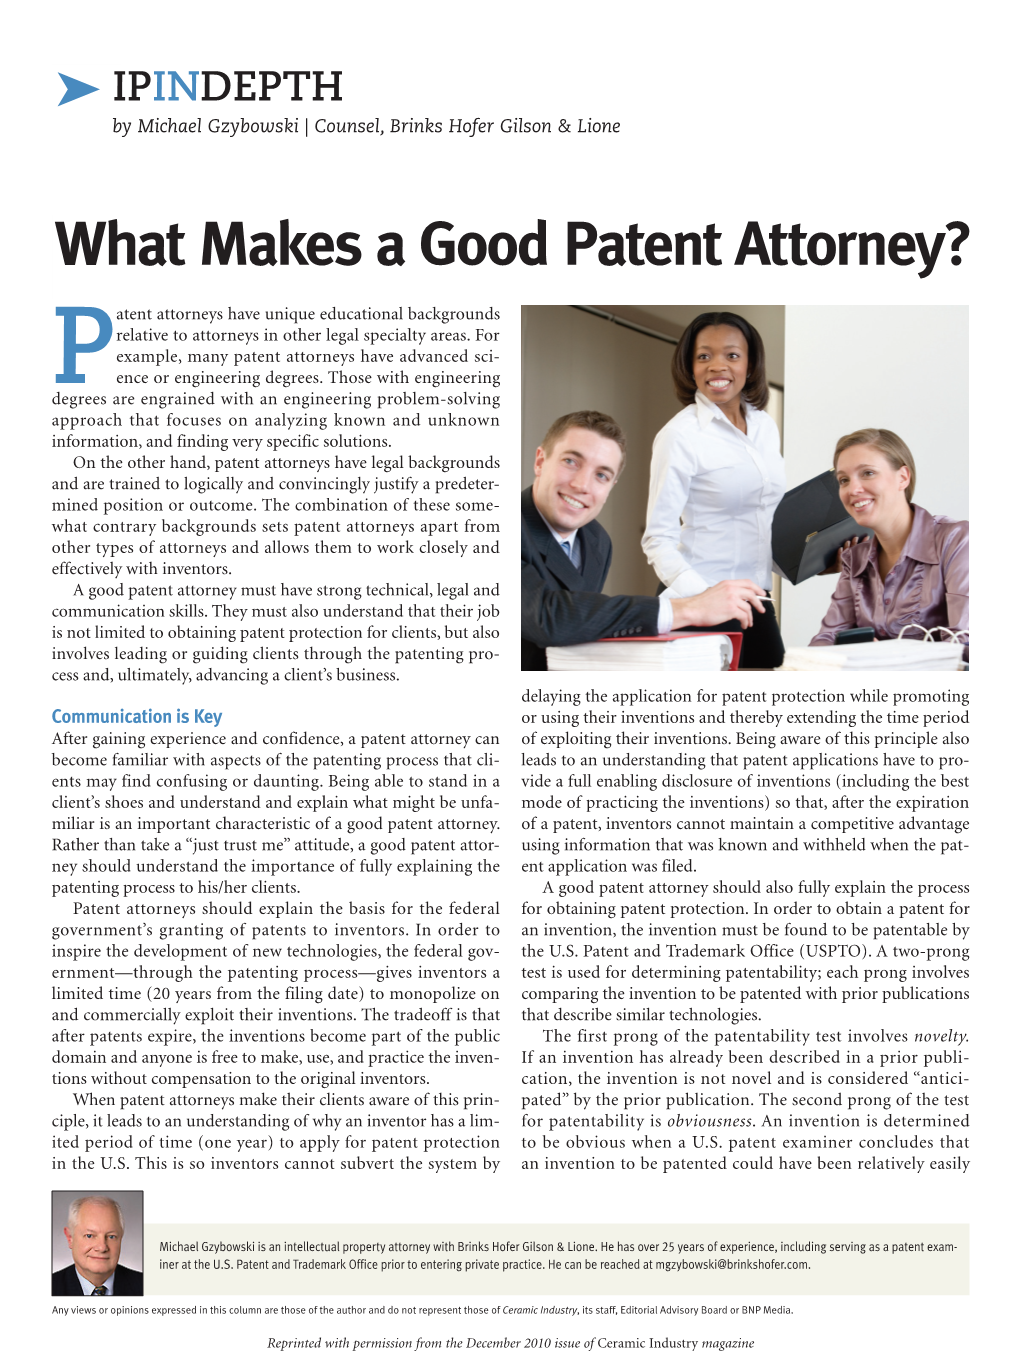 What Makes a Good Patent Attorney?